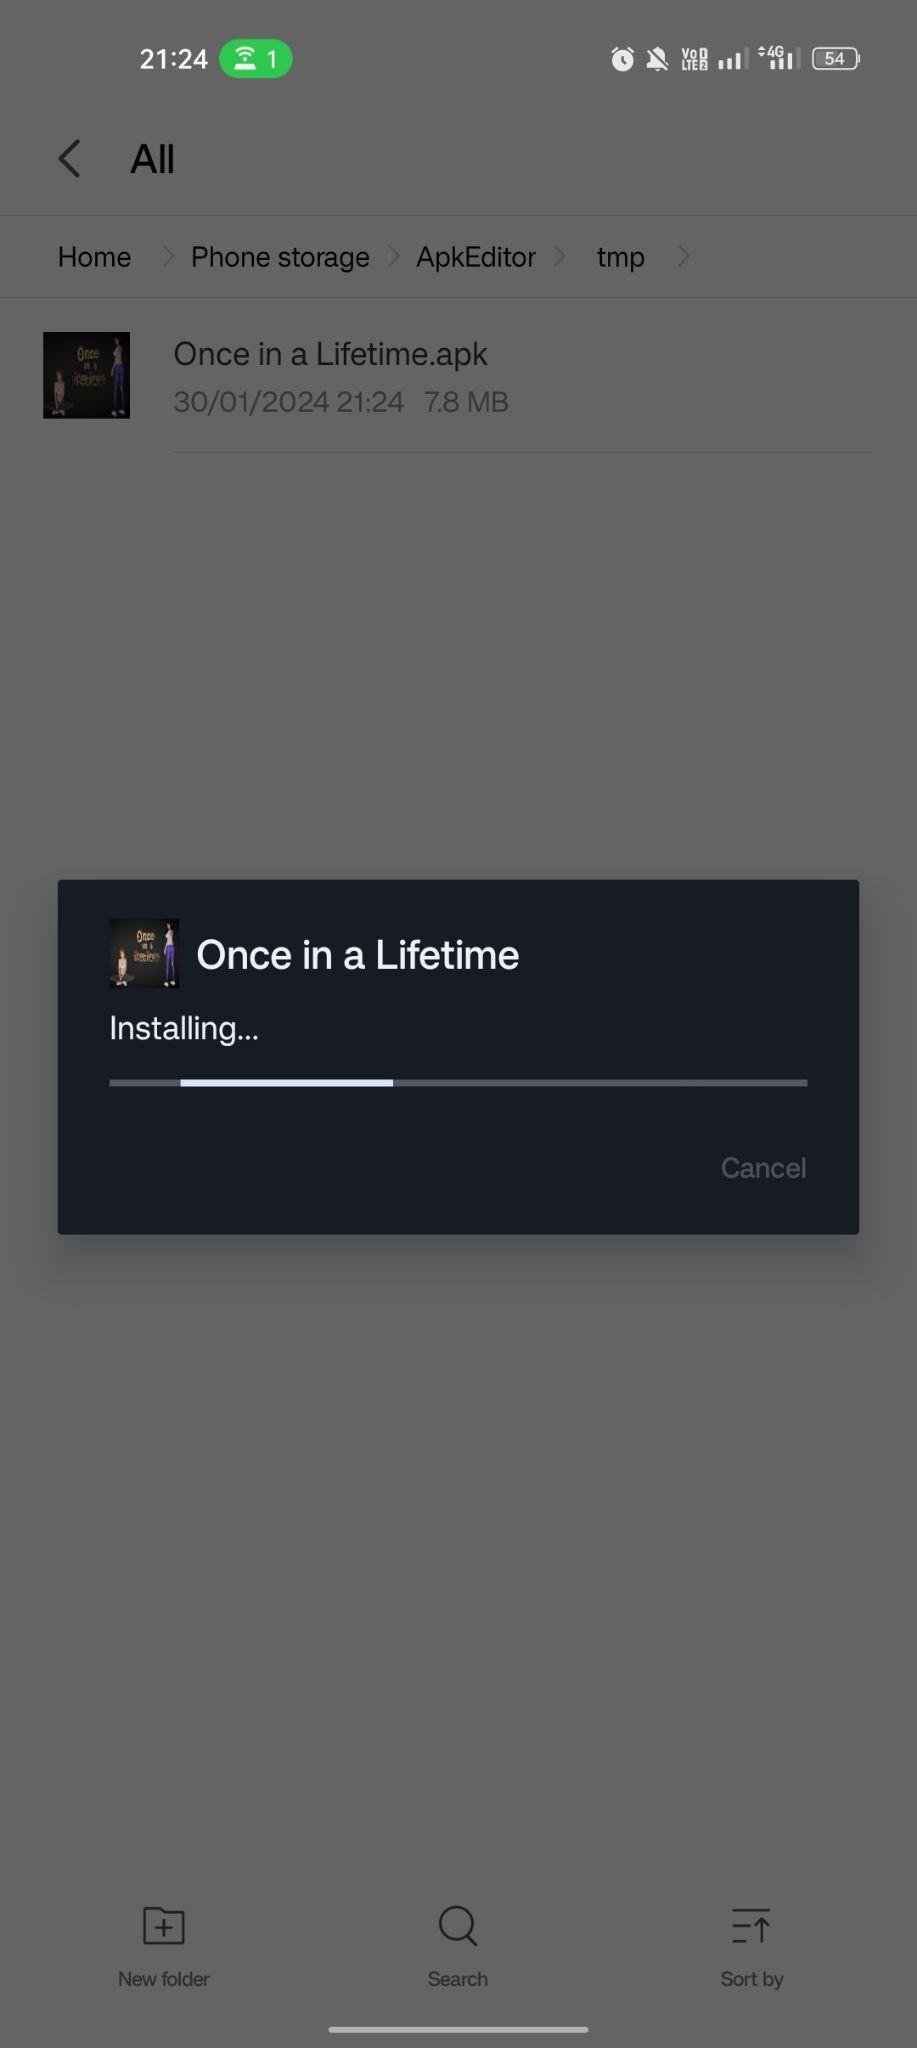 Once In a Lifetime apk installing